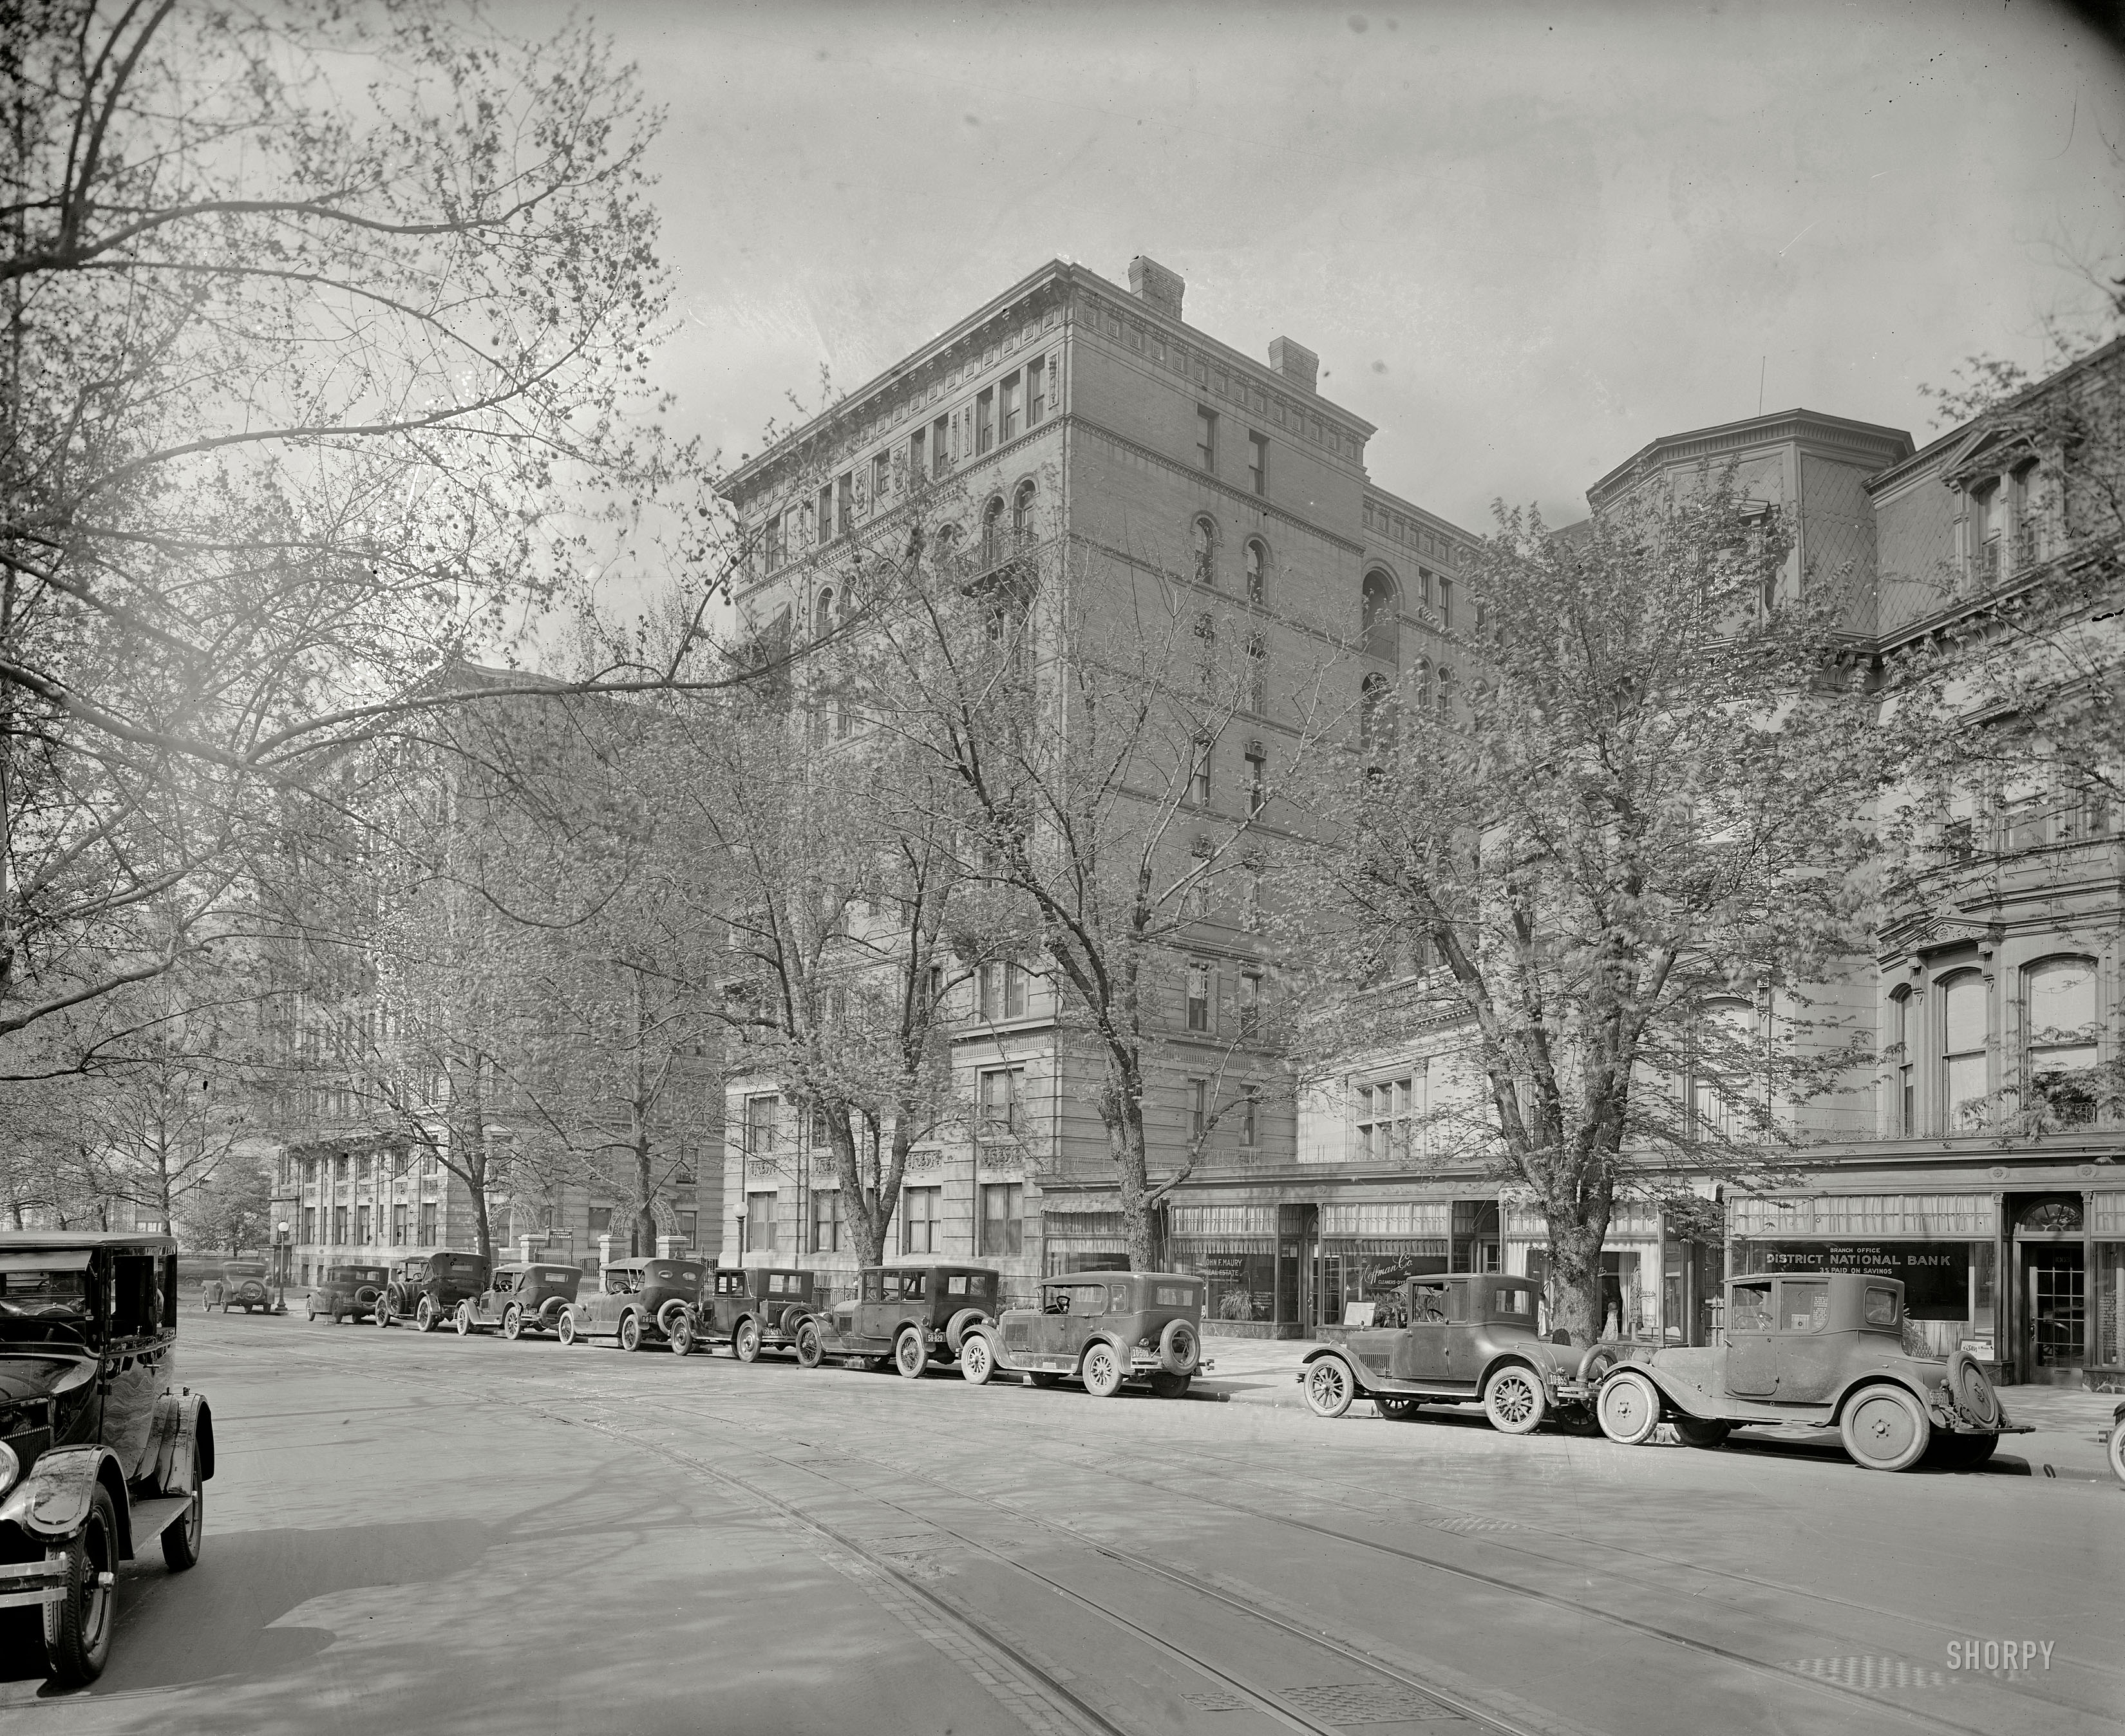 Washington, D.C., circa 1925. "Stoneleigh Court, L Street N.W." Springtime in the nation's capital. National Photo Company glass negative. View full size.